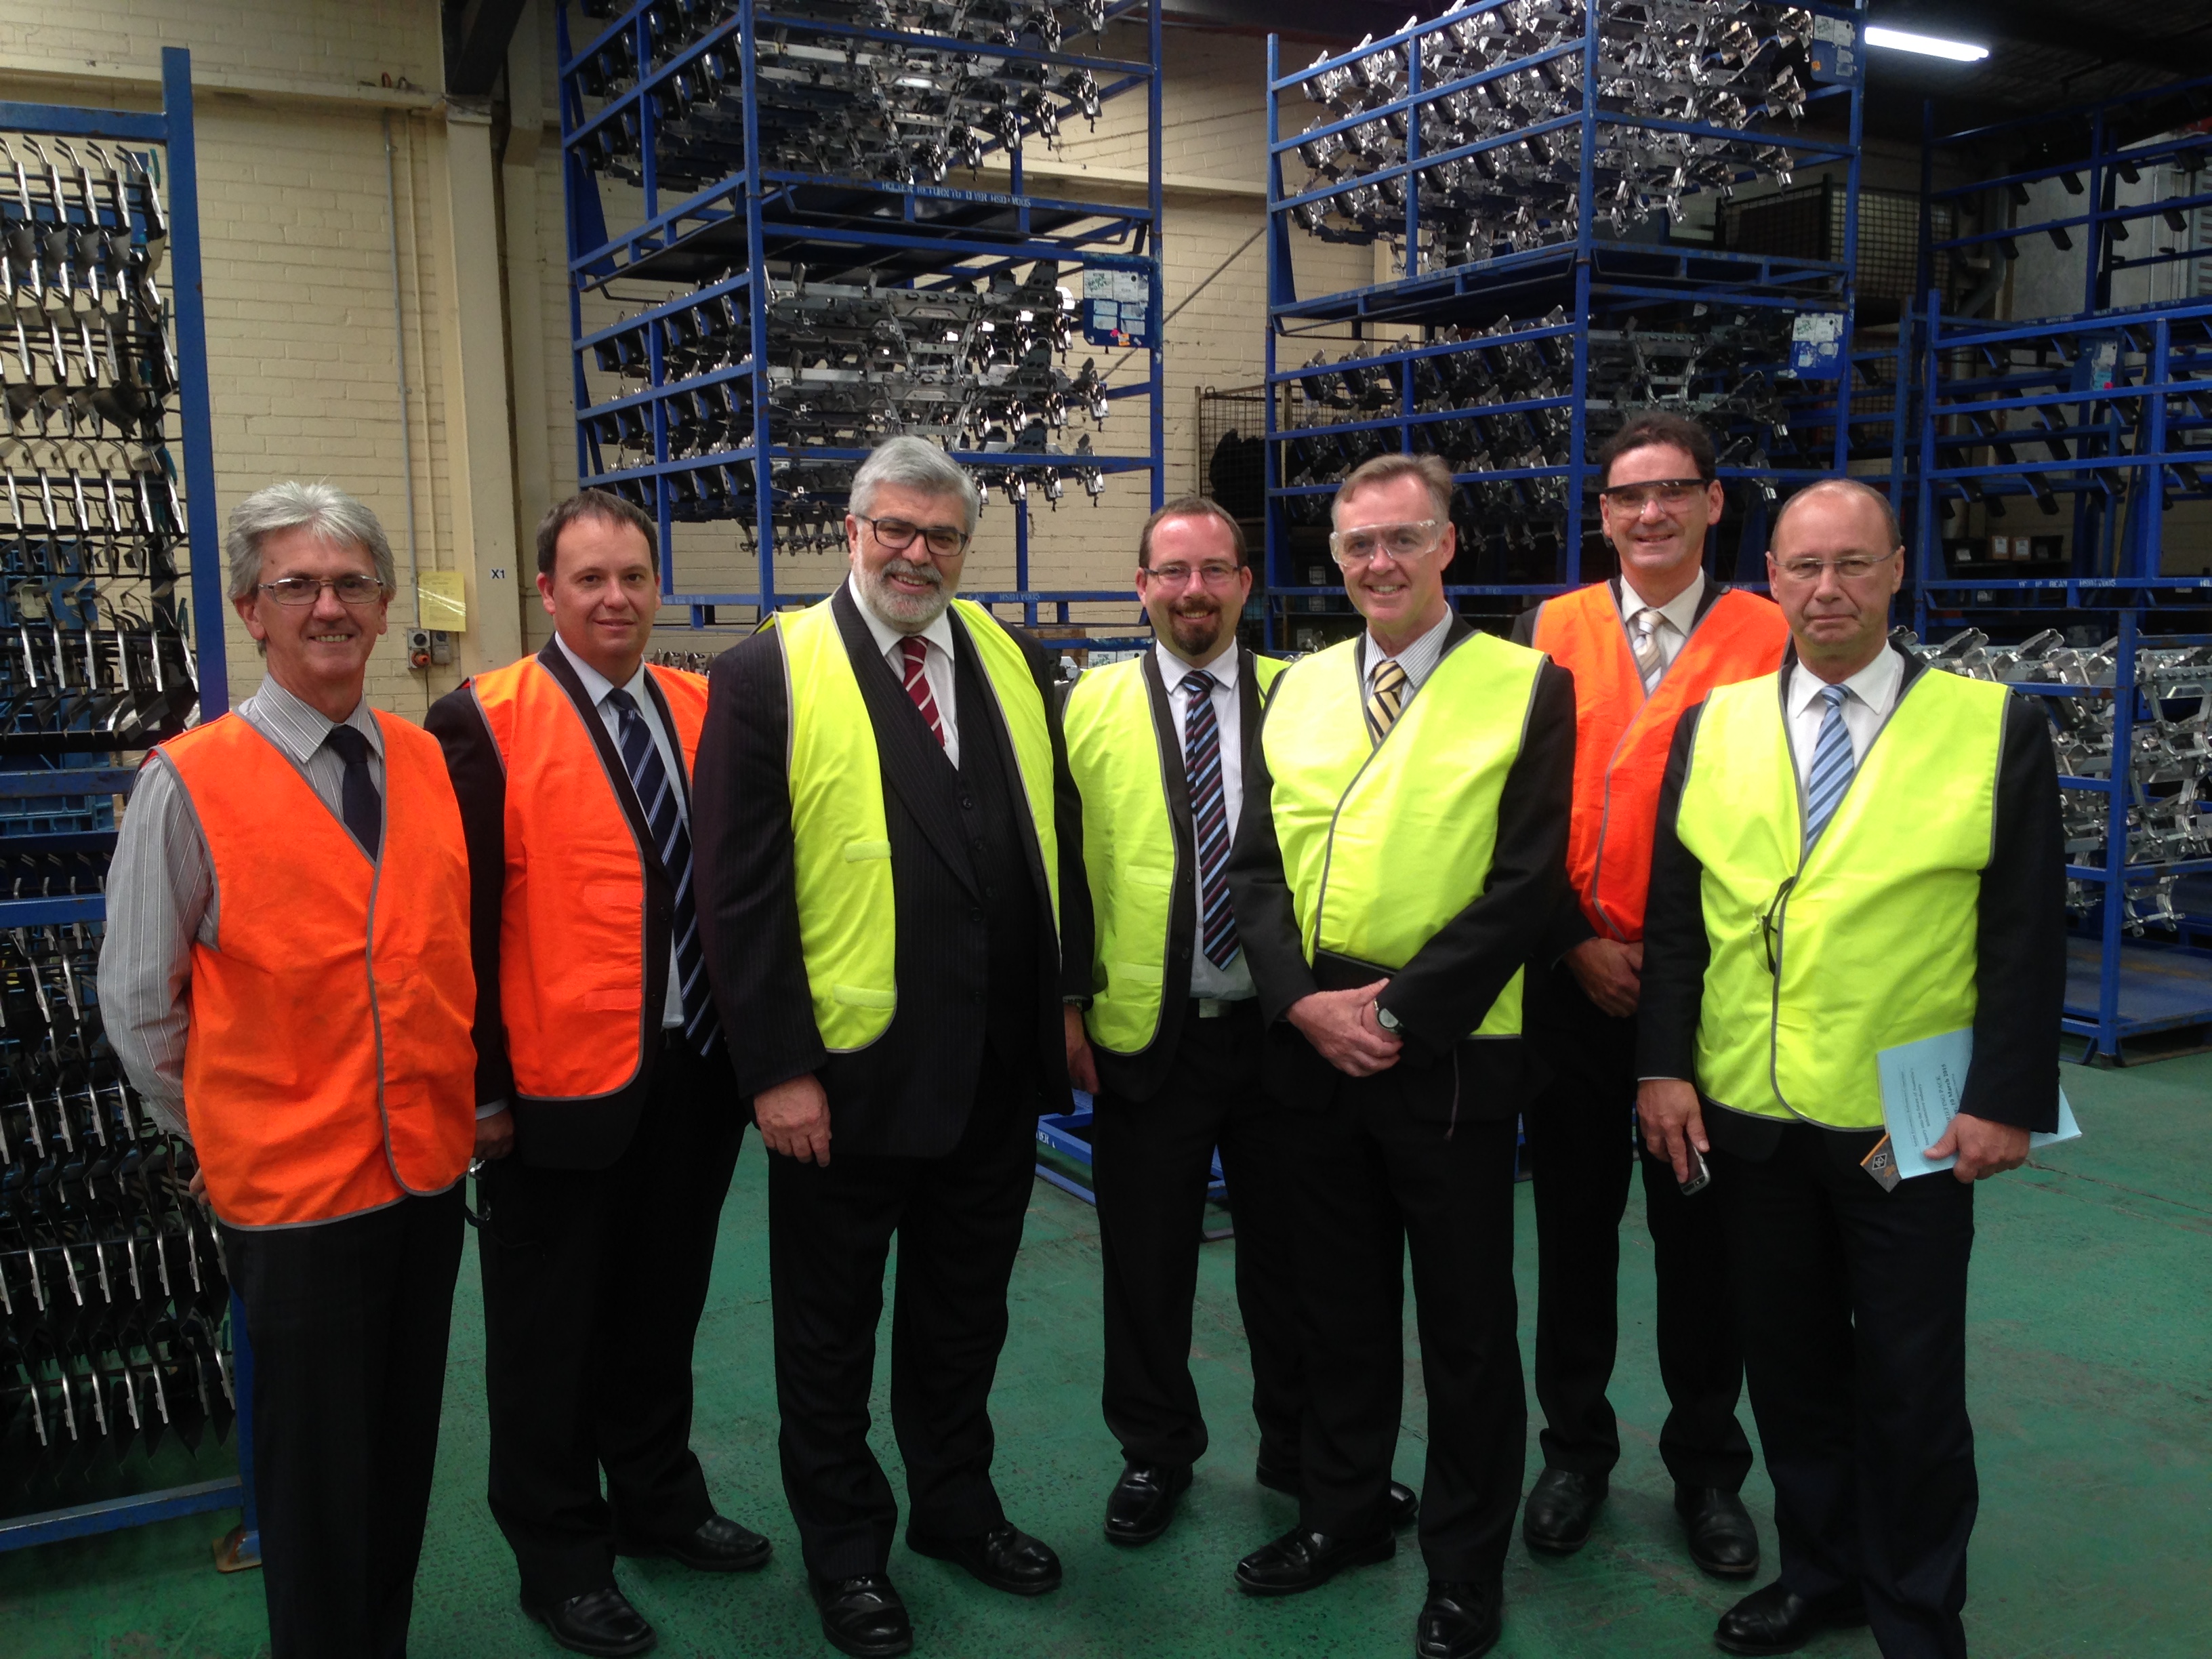 Site visit to Consolidated Industries, Reservoir, Vic, 10 March 2015. In yellow, L-R: Senators Kim Carr, Ricky Muir, Chris Ketter [Chair] and Sean Edwards [Deputy Chair].